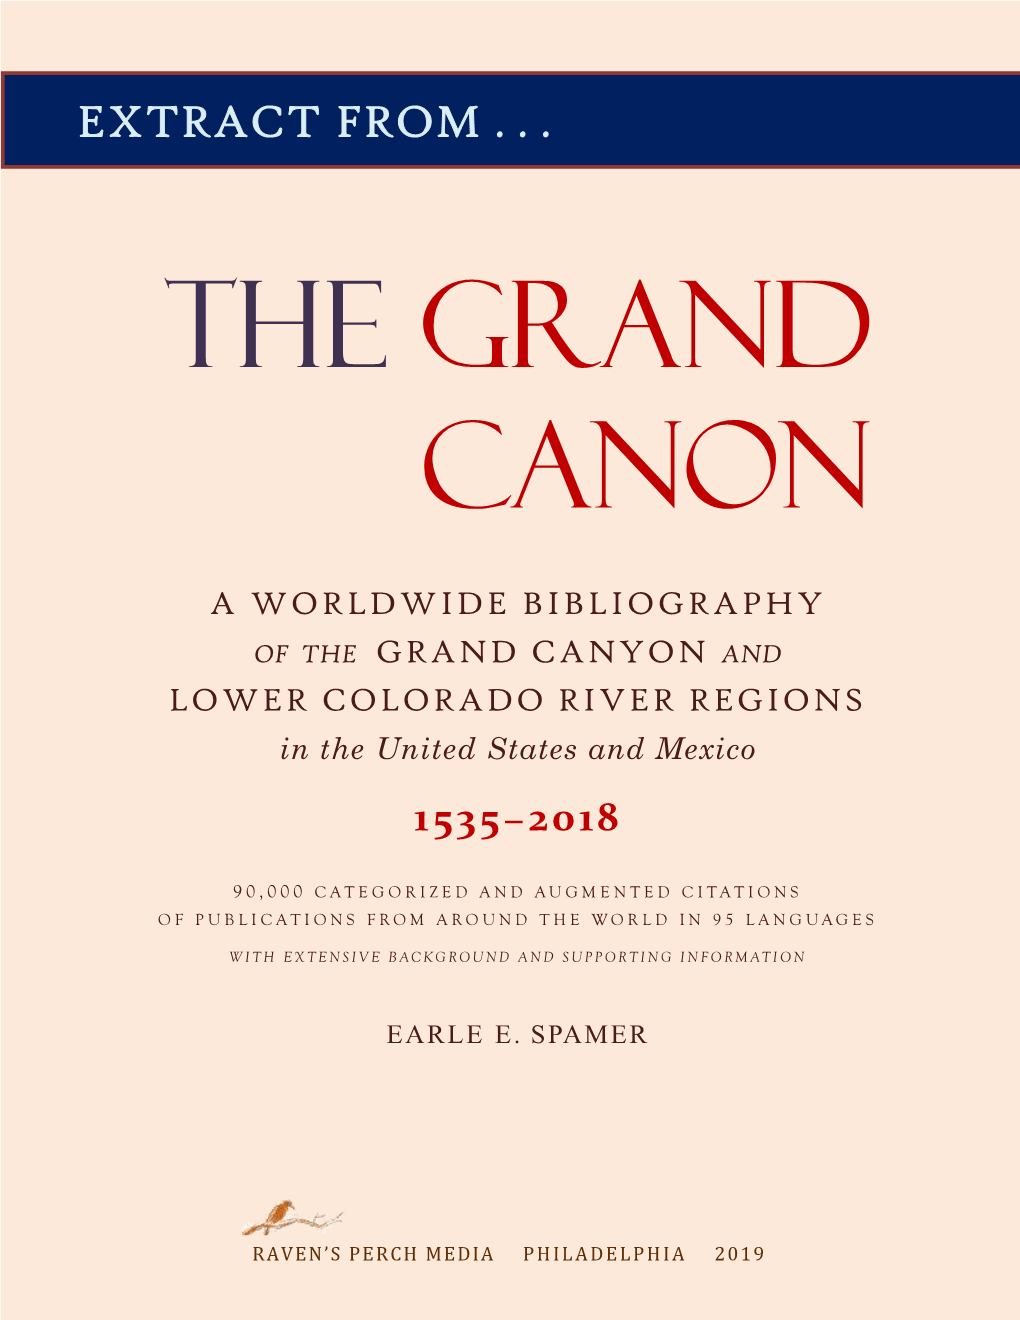 Bibliography of the Grand Canyon and the Lower Colorado River by Earle E